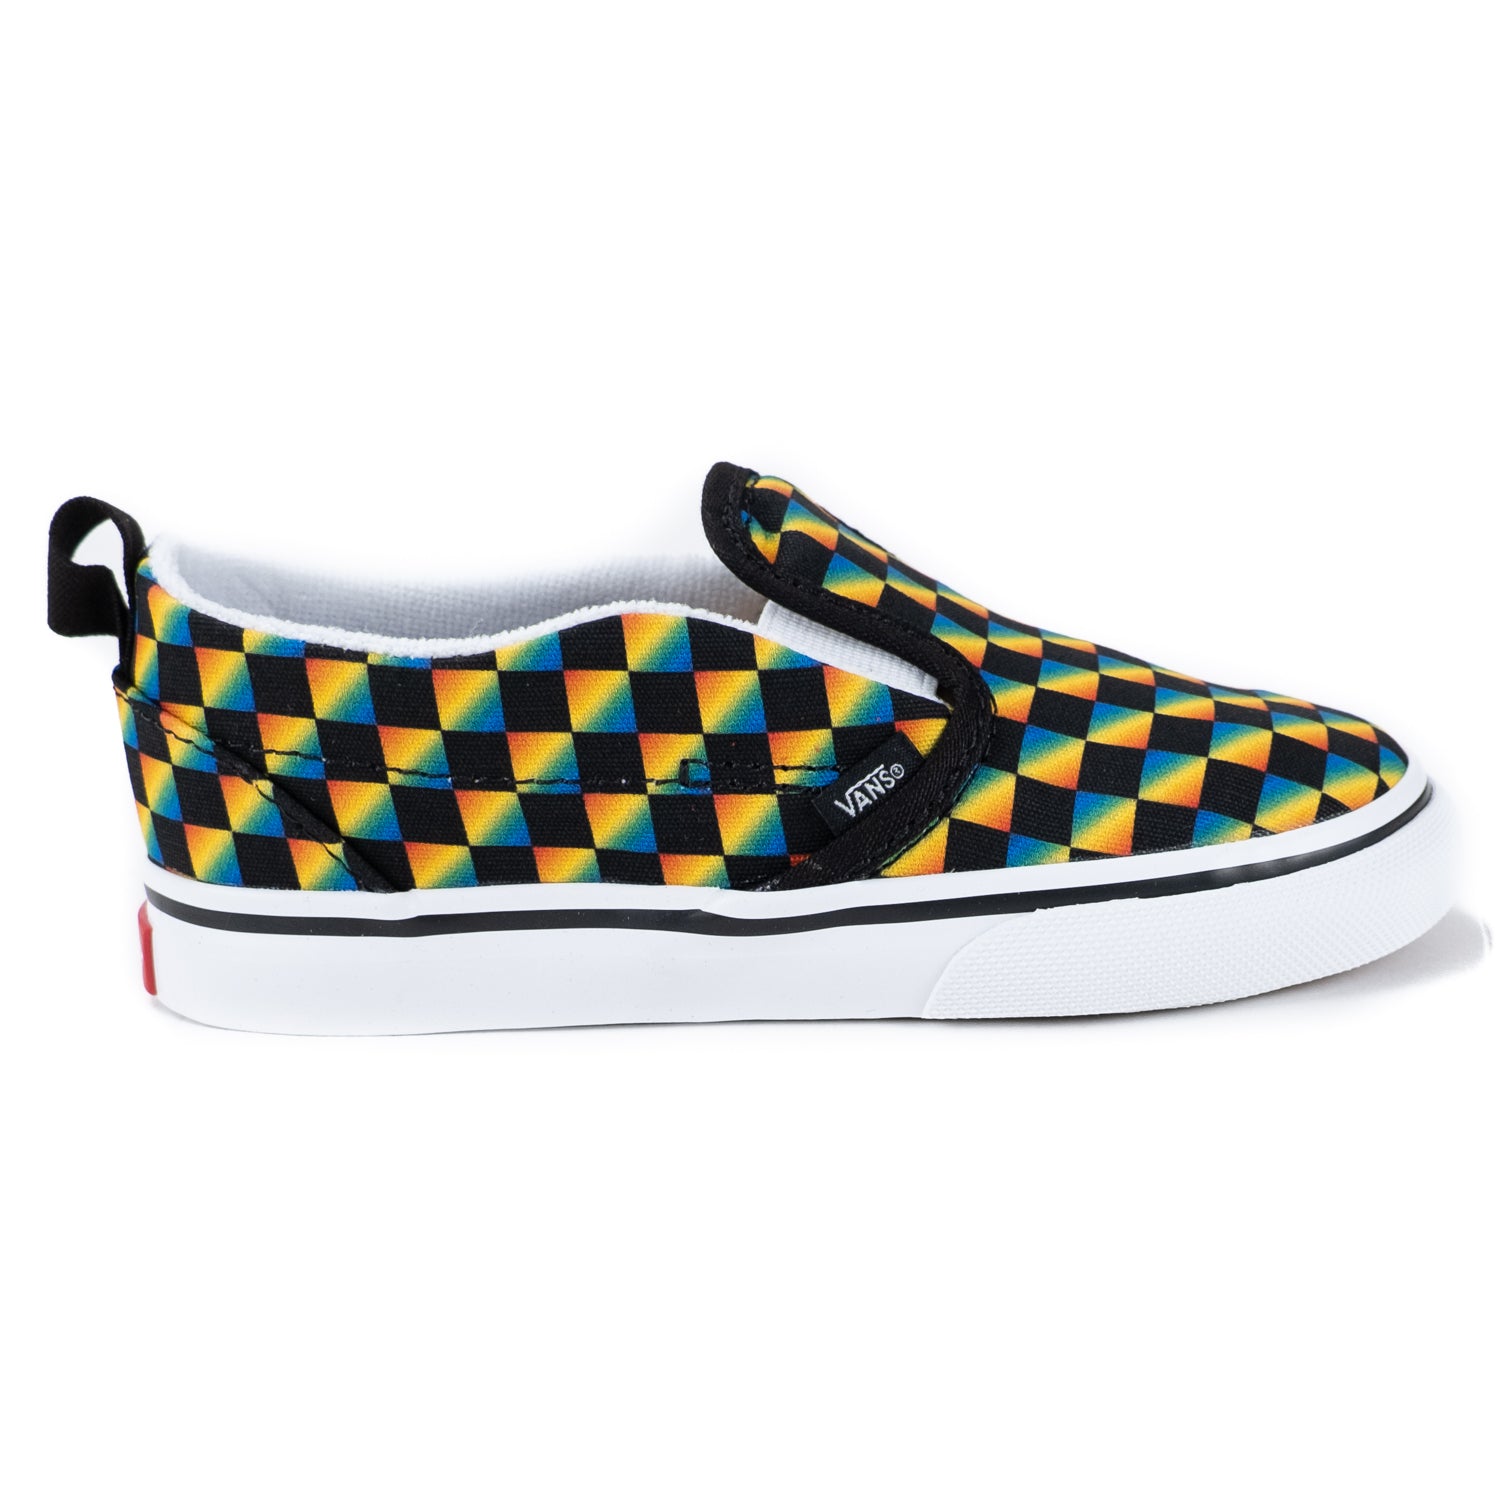 Vans, Shoes, Yellow Checkered Vans Shoes Slip On Shoes